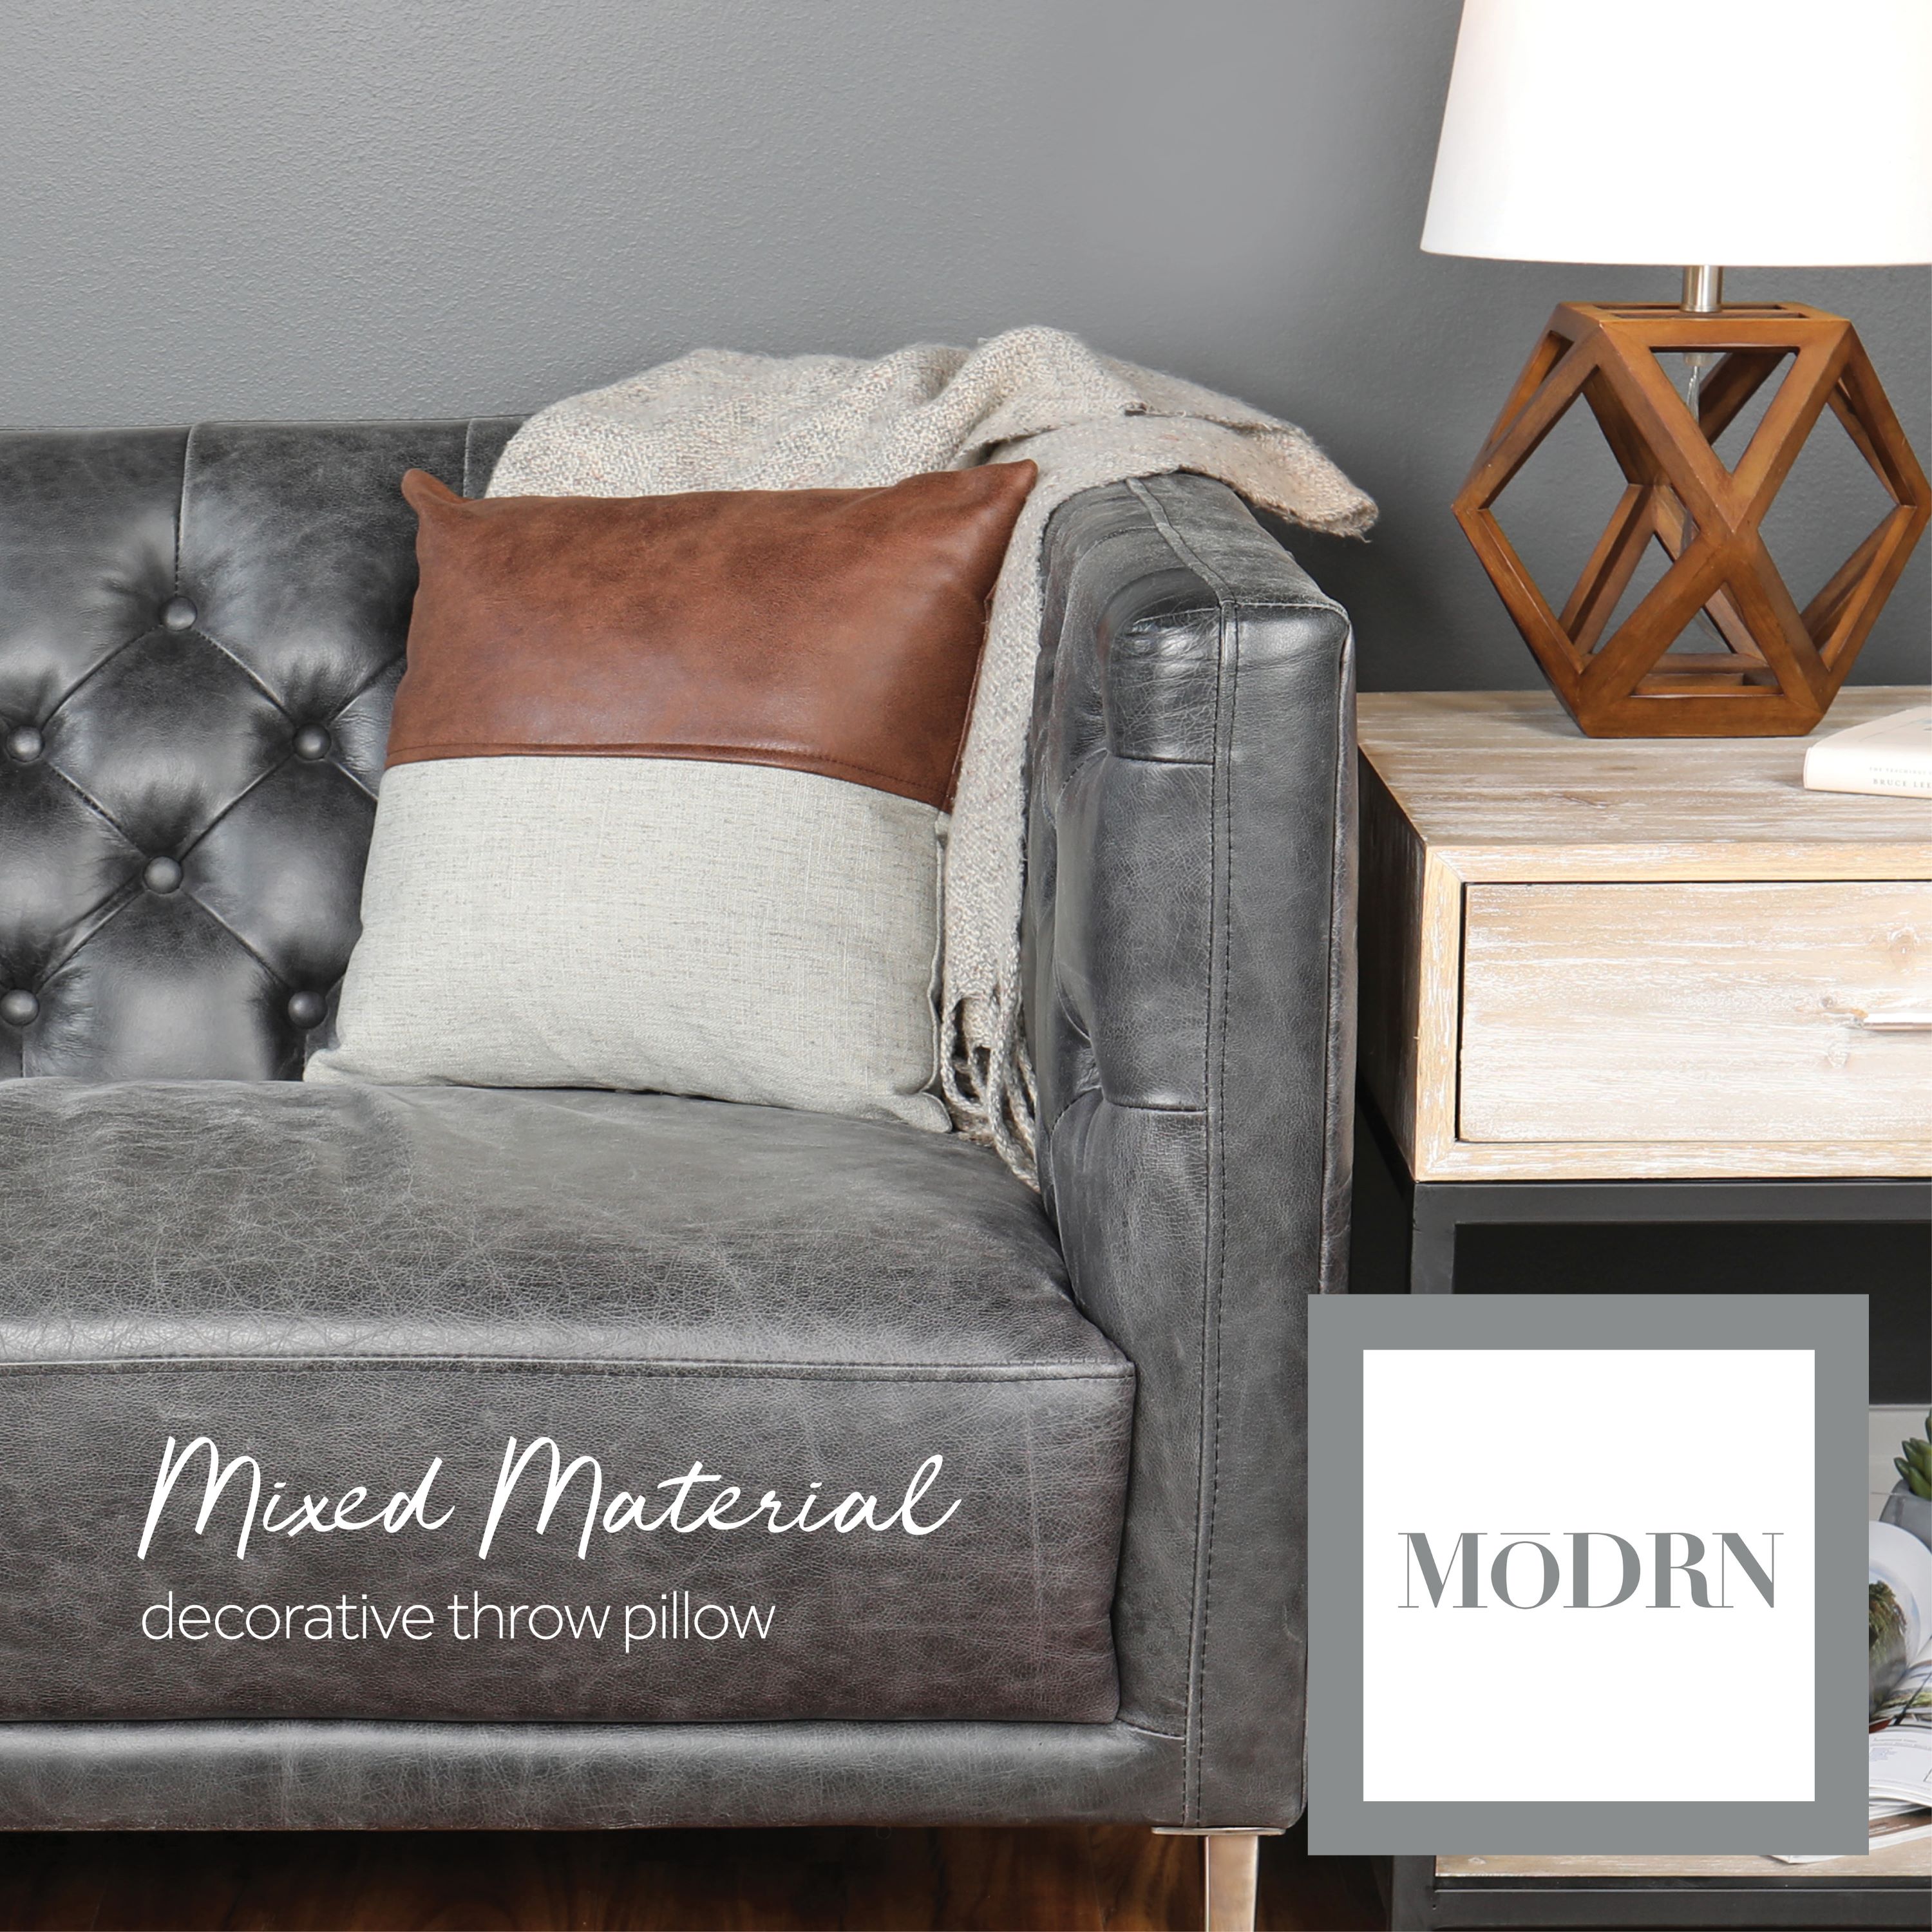 MoDRN Industrial Mixed Material Decorative Square Throw Pillow, 16" x 16", Faux Leather - image 2 of 9